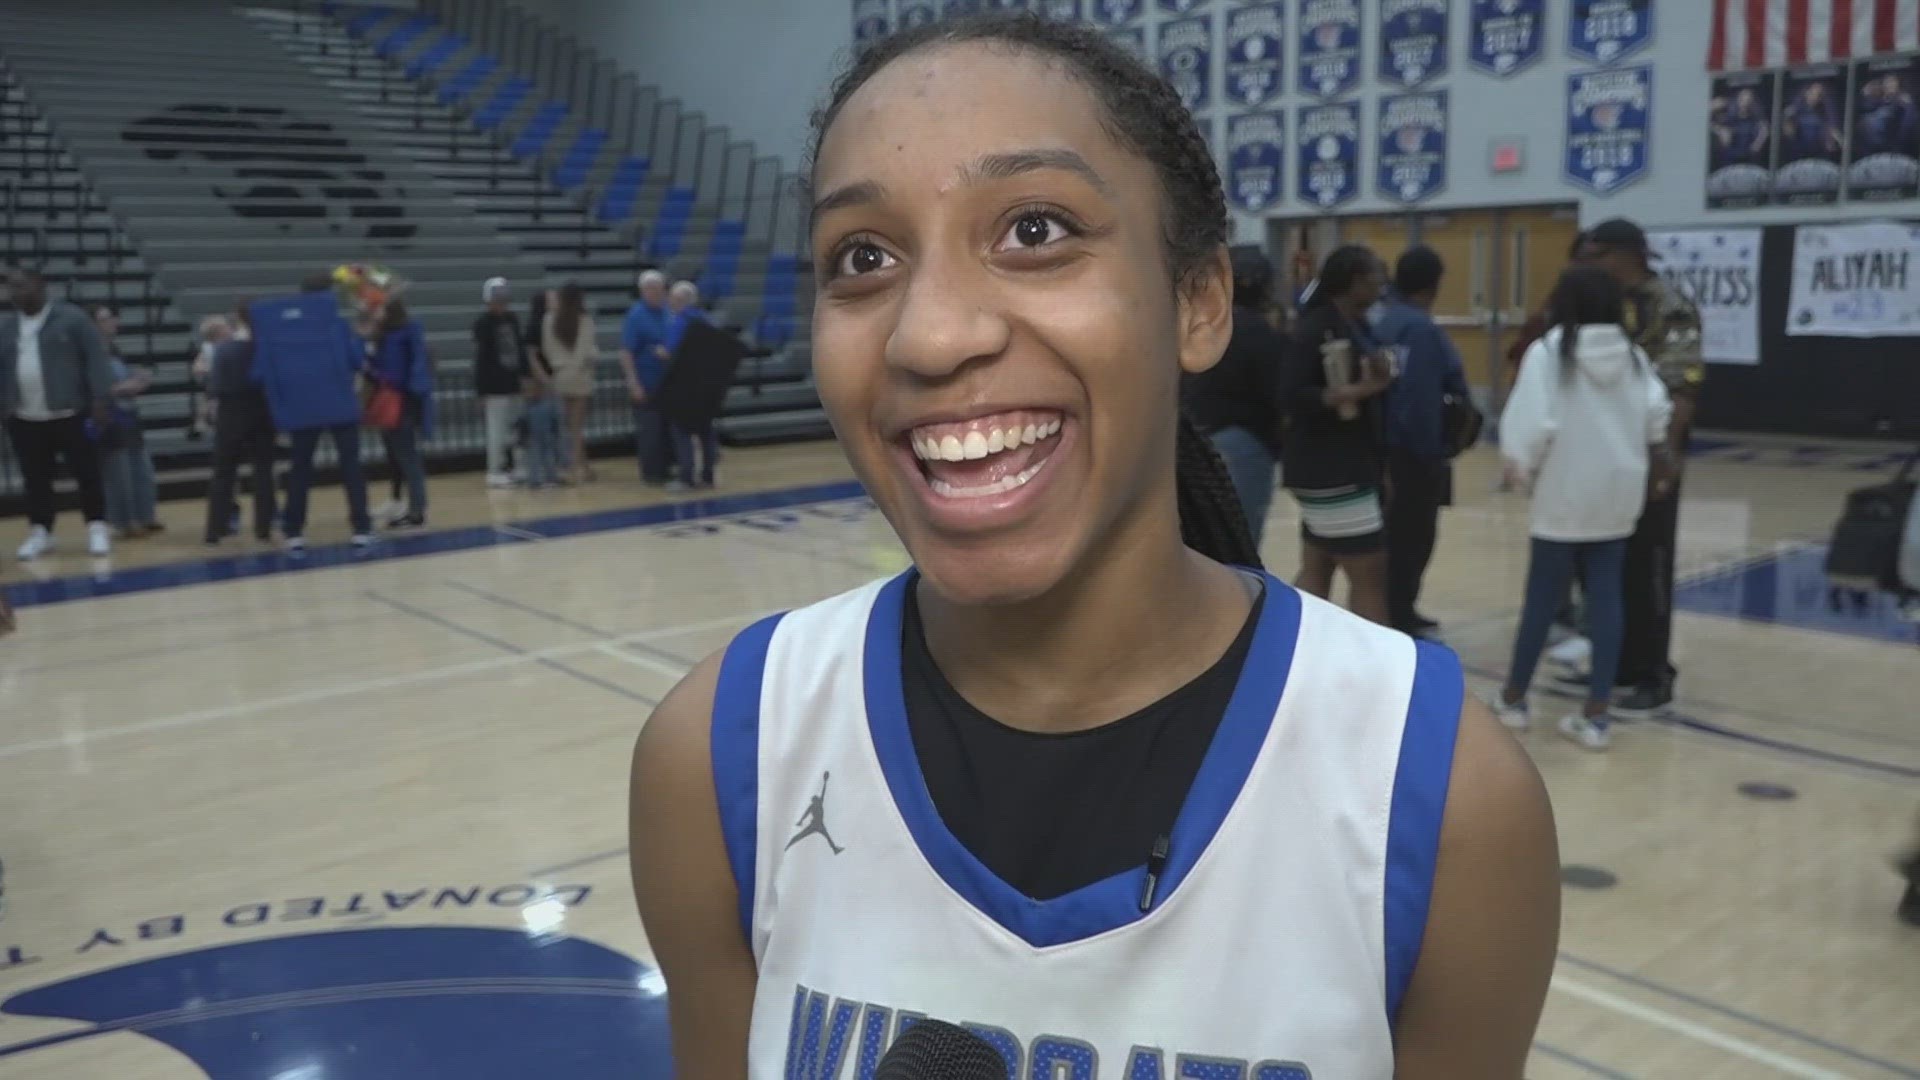 Fans, teammates and onlookers went wild when the junior hit her 1,000th bucket this month.